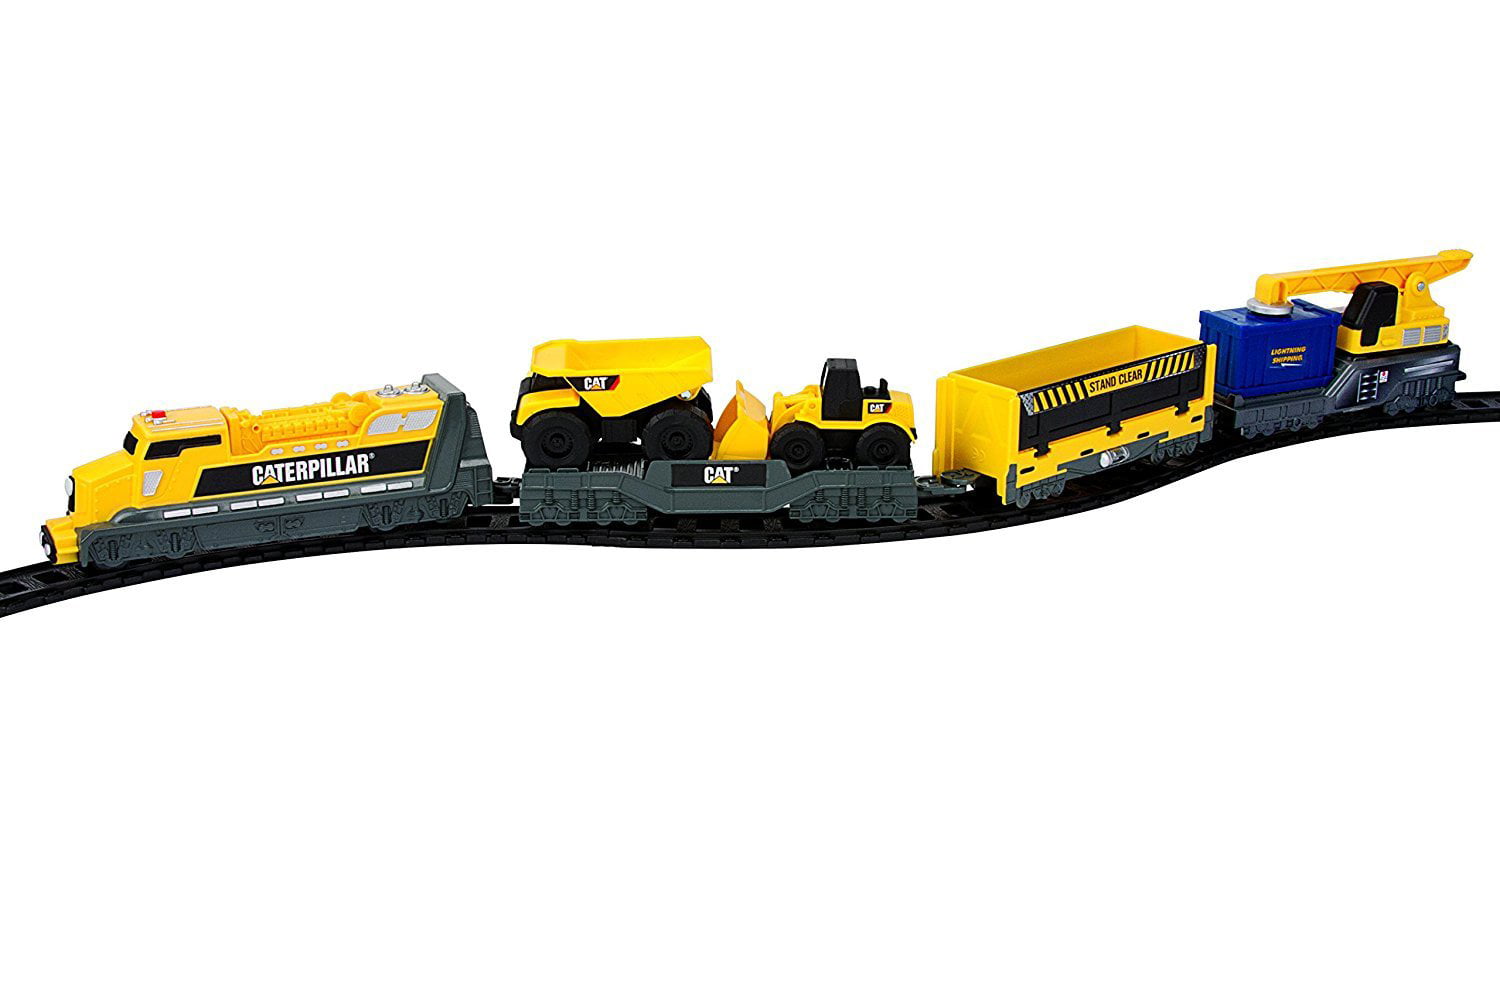 Details about   Toy State CAT CATERPILLAR CONSTRUCTION TRAIN LOCOMOTIVE ENGINE O SCALE WORKS! 